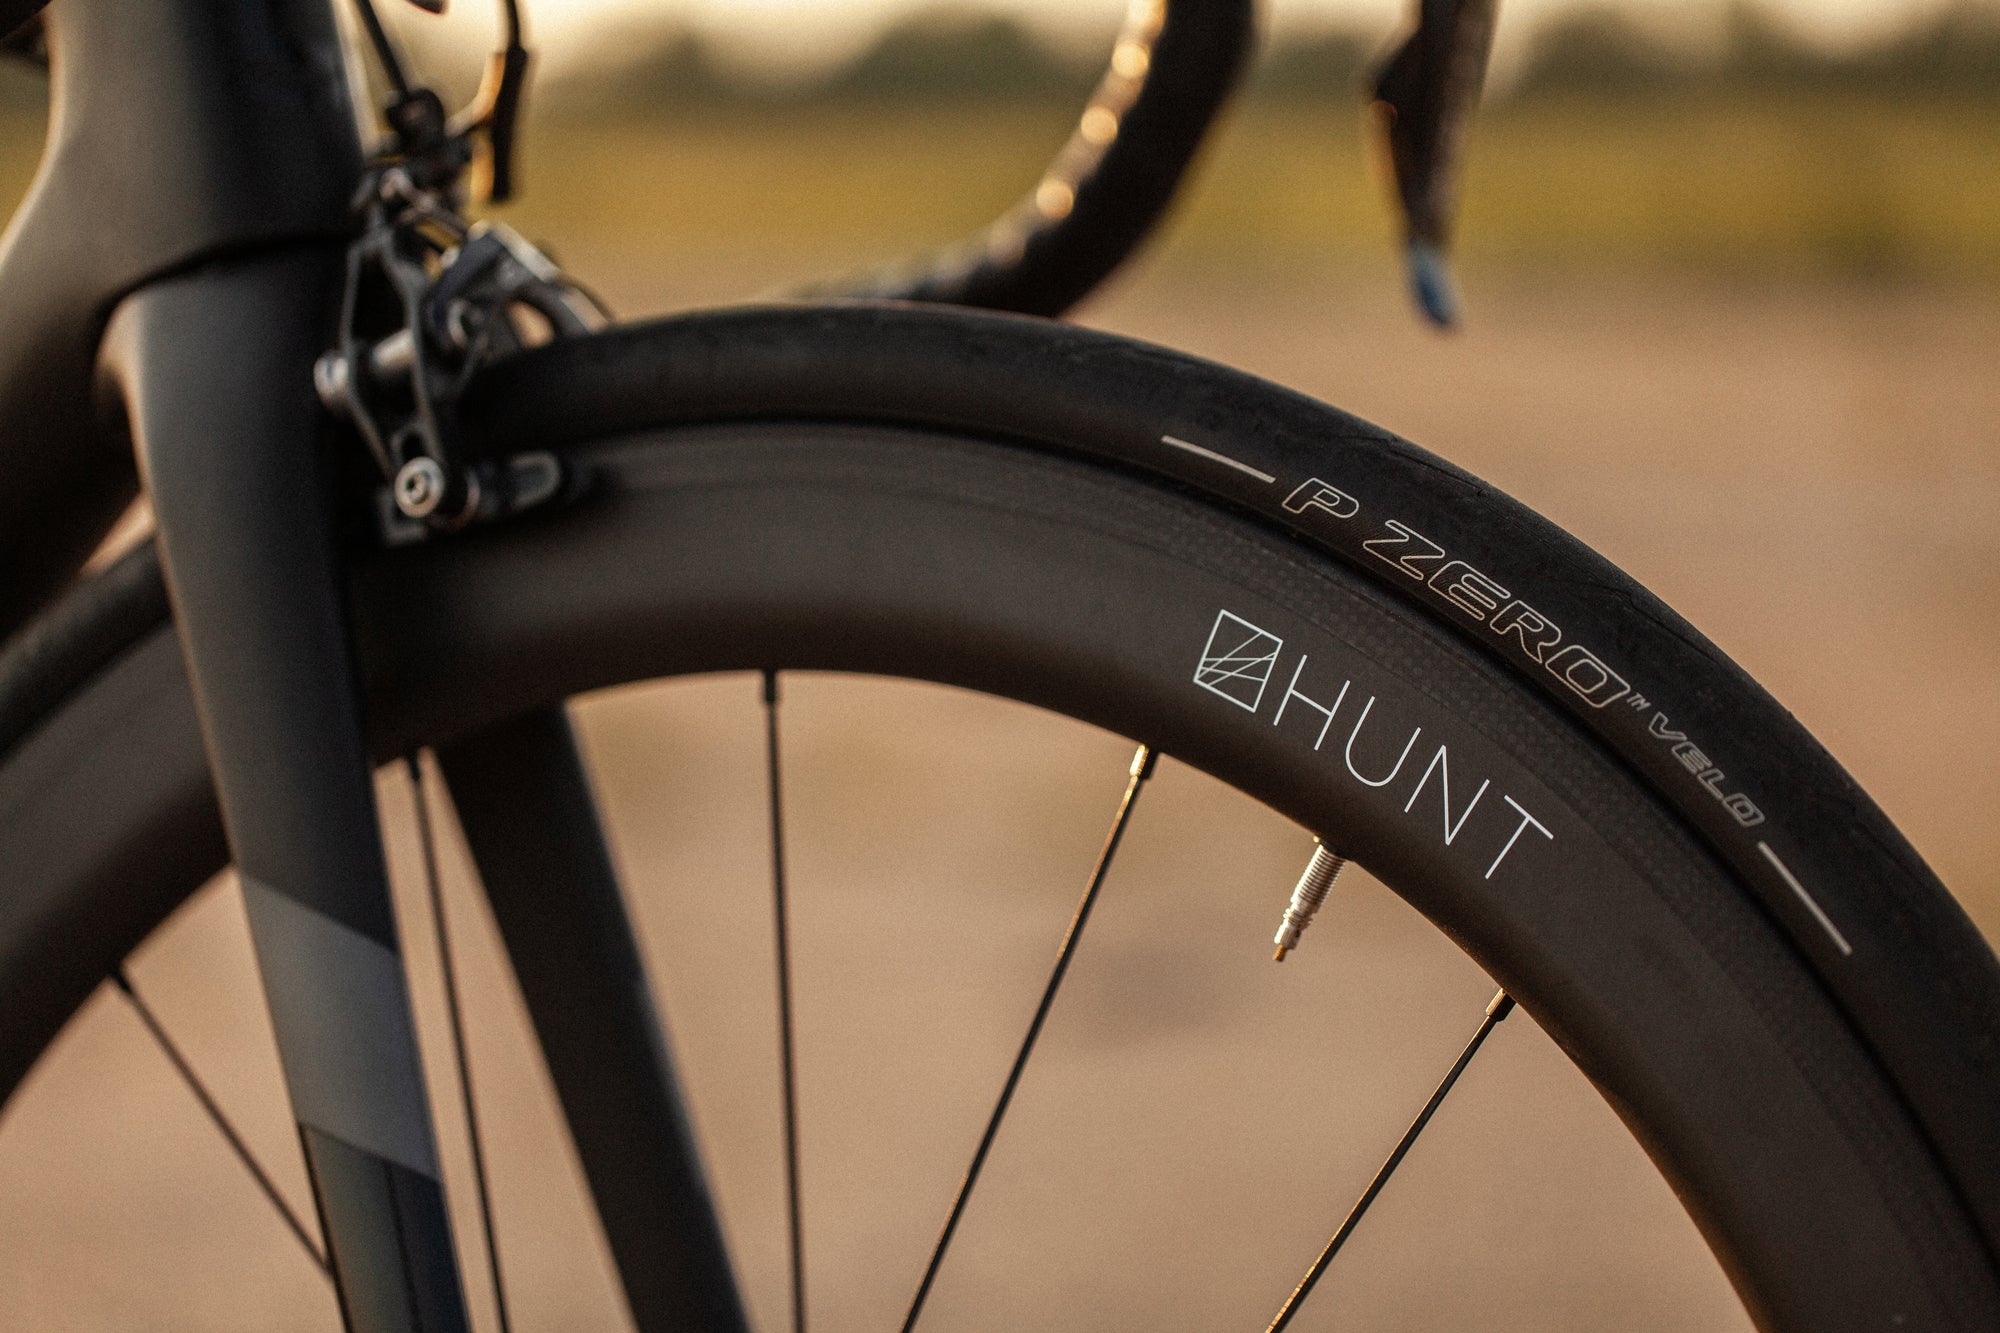 <h1>Tires</h1><i>At HUNT, we enjoy the puncture resistance and grip benefits of tubeless on our every-day rides so we wanted to allow our customers the same option. Of course, all of our tubeless-ready wheels are designed to work perfectly with clincher tires and inner tubes too.</i>